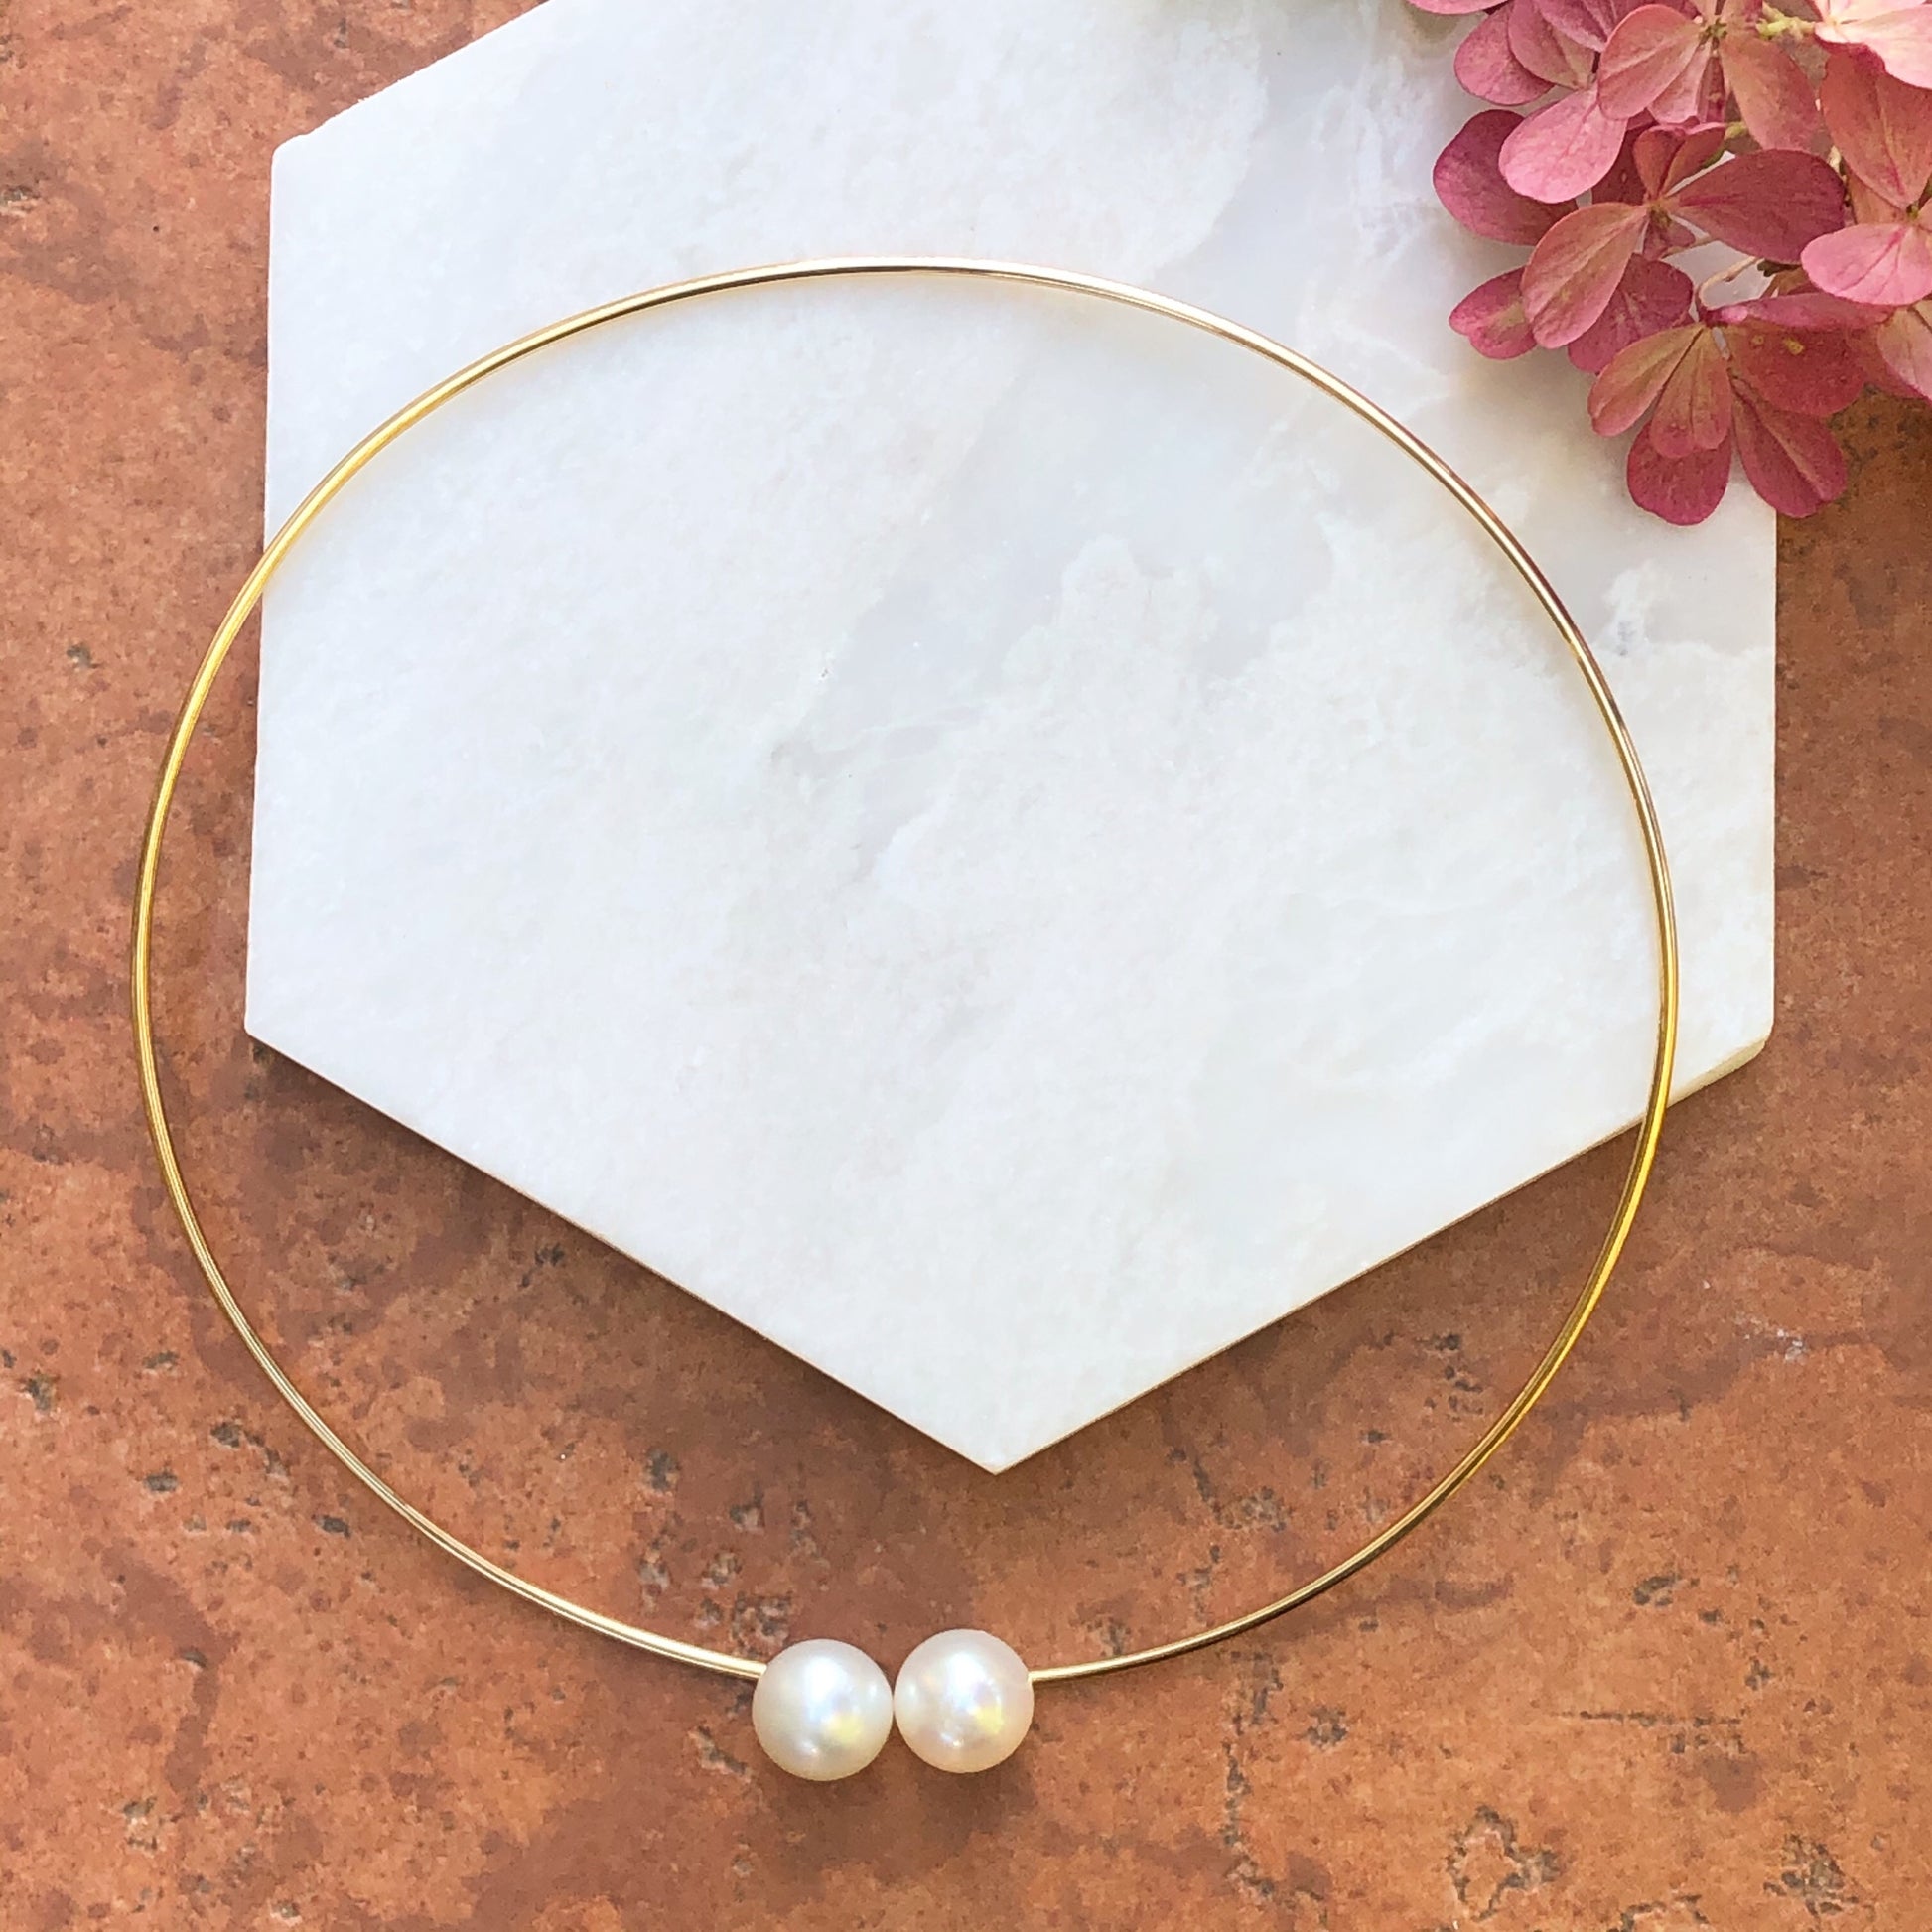 14KT Yellow Gold + Paspaley Pearl Neck Wire Collar Necklace, 14KT Yellow Gold + Paspaley Pearl Neck Wire Collar Necklace - Legacy Saint Jewelry